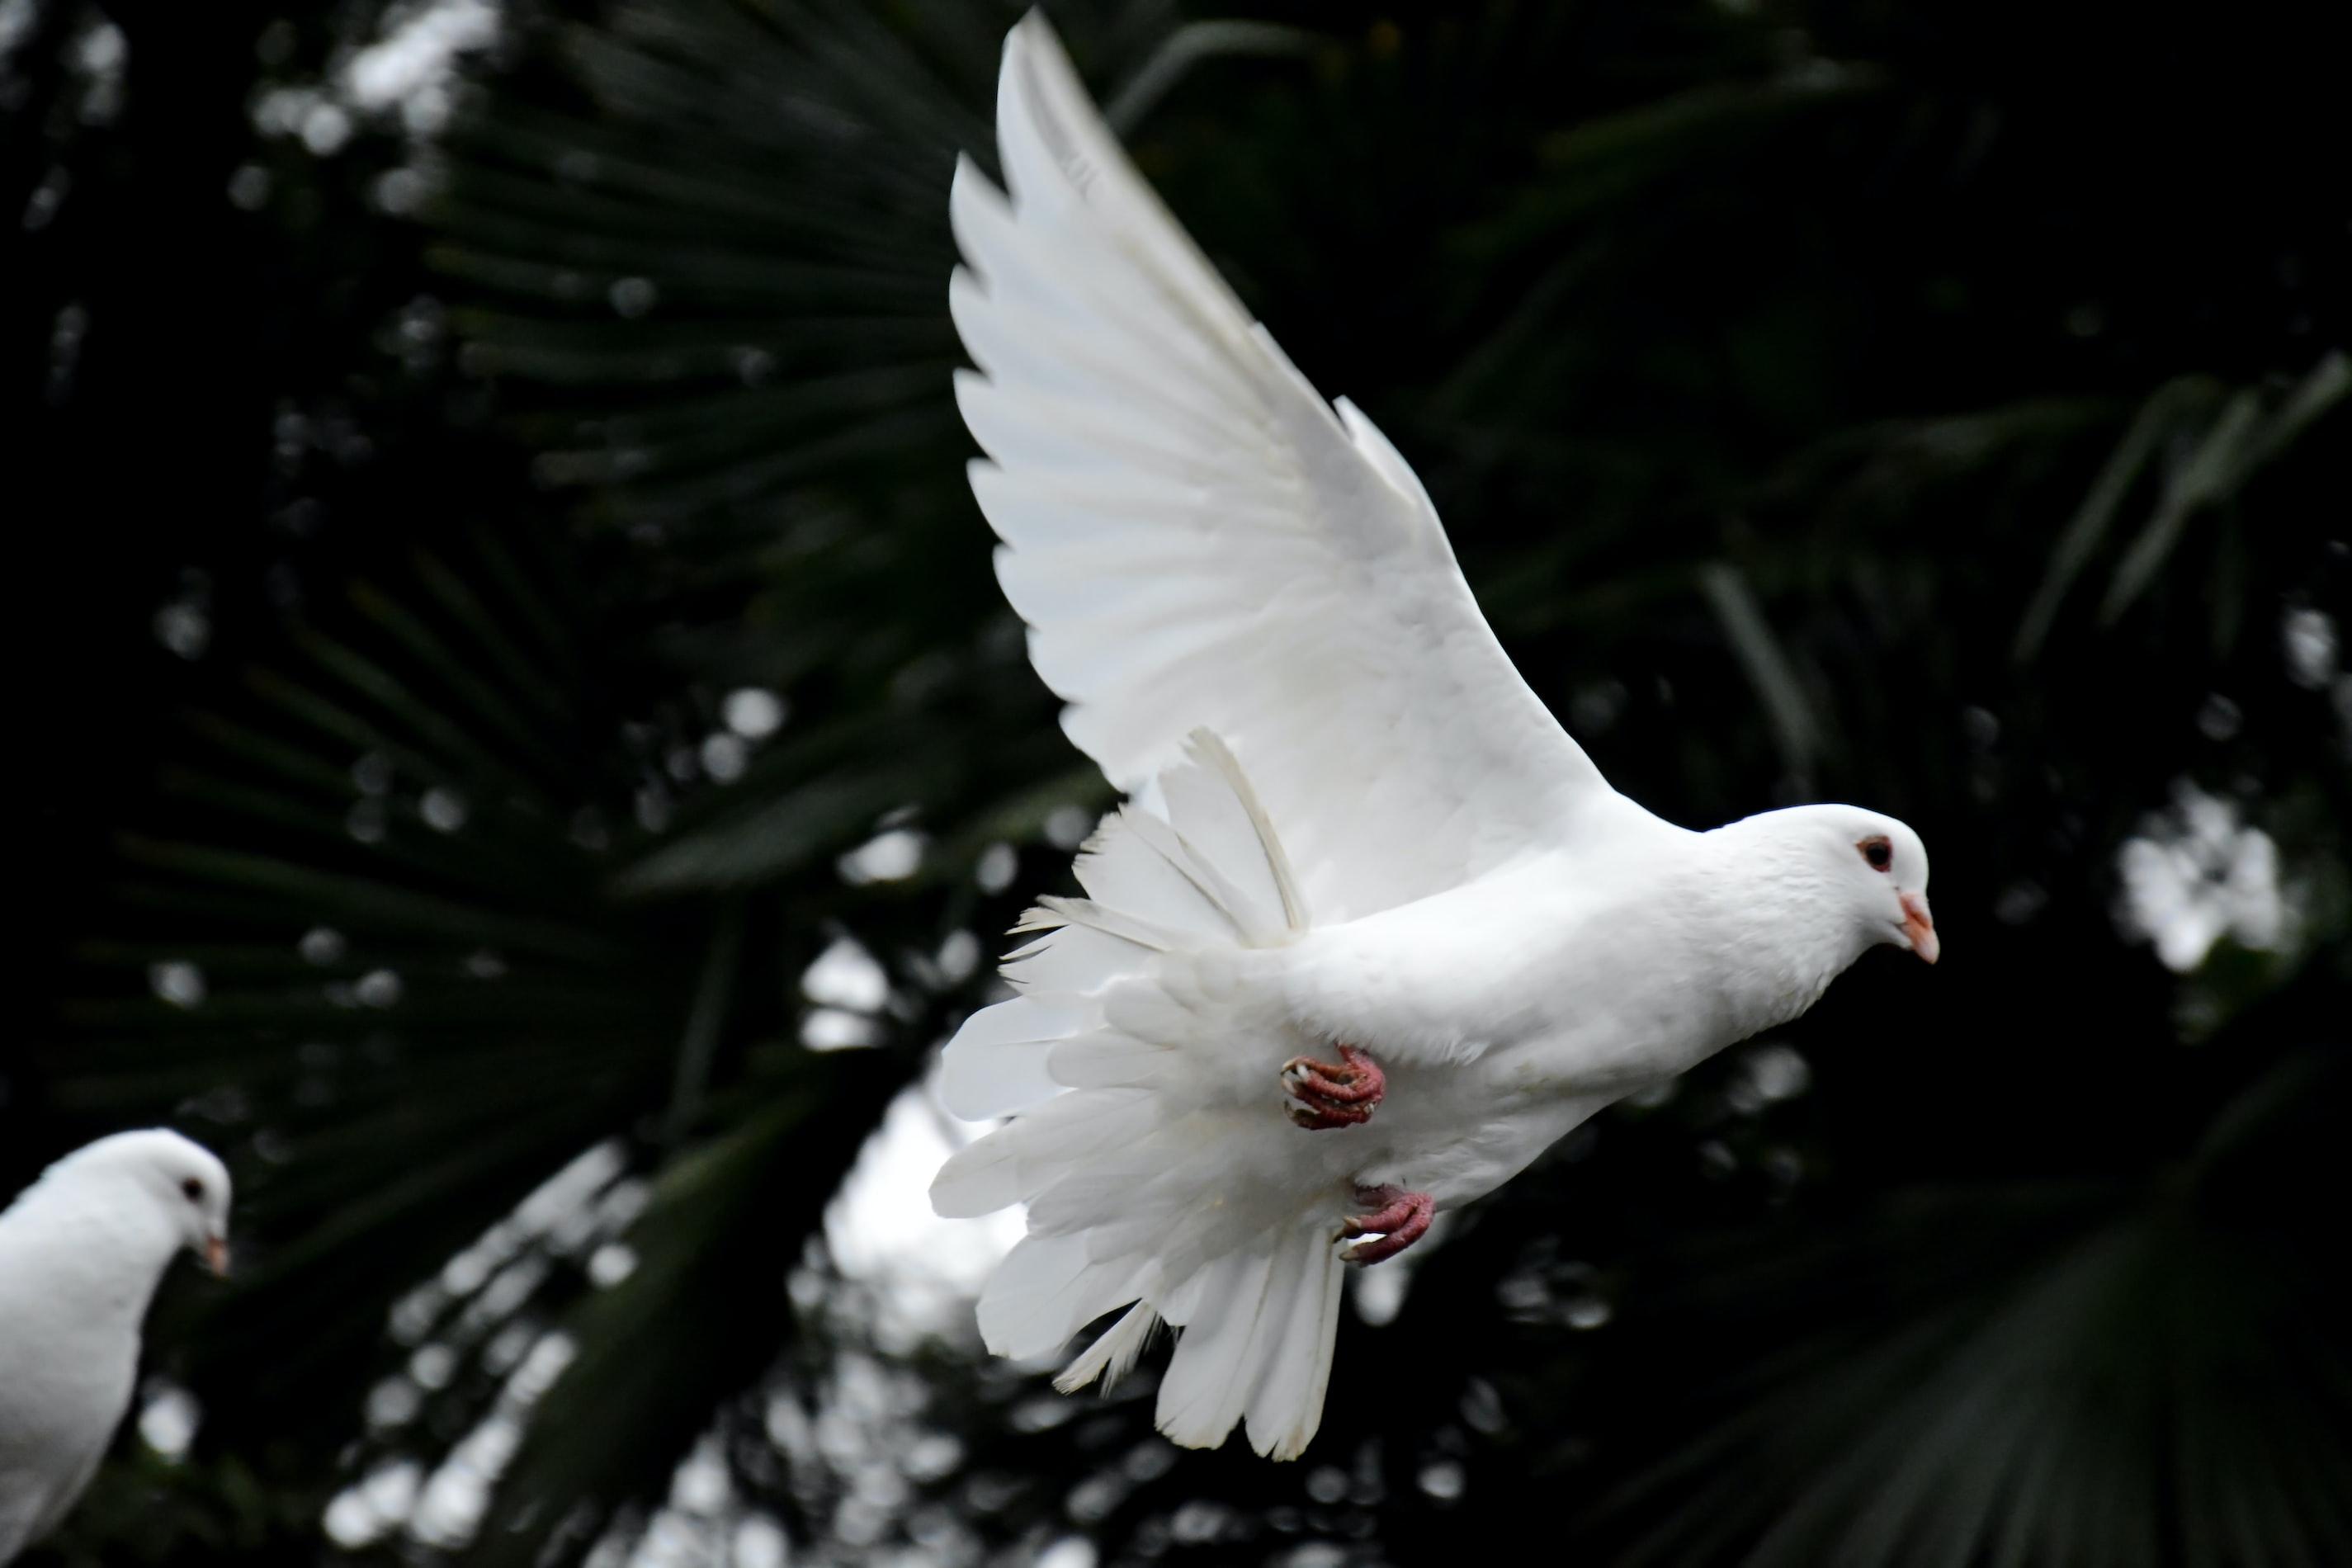 When doves fly